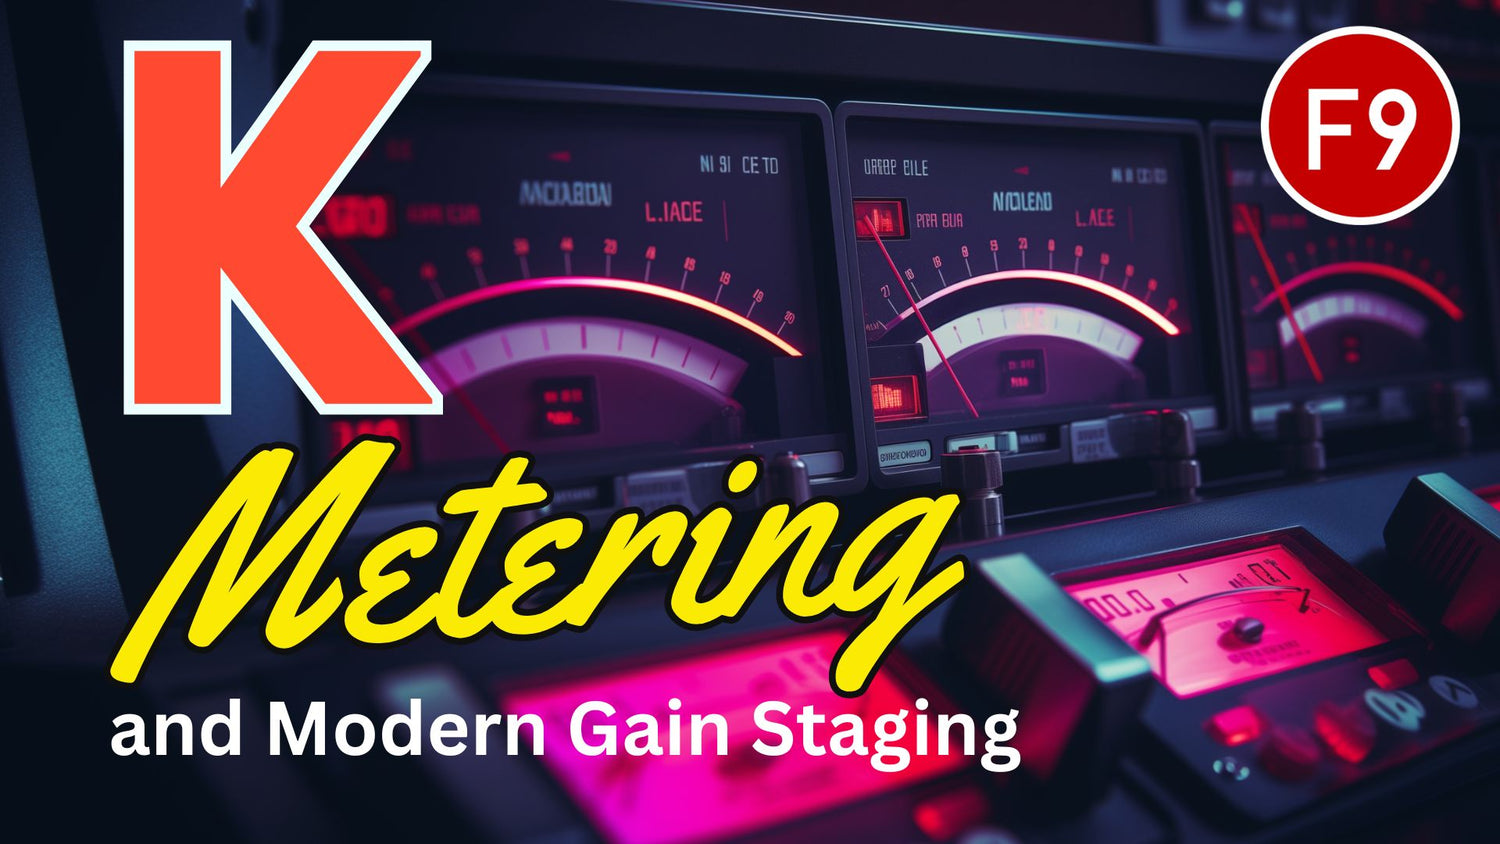 K-Metering and professional gain staging